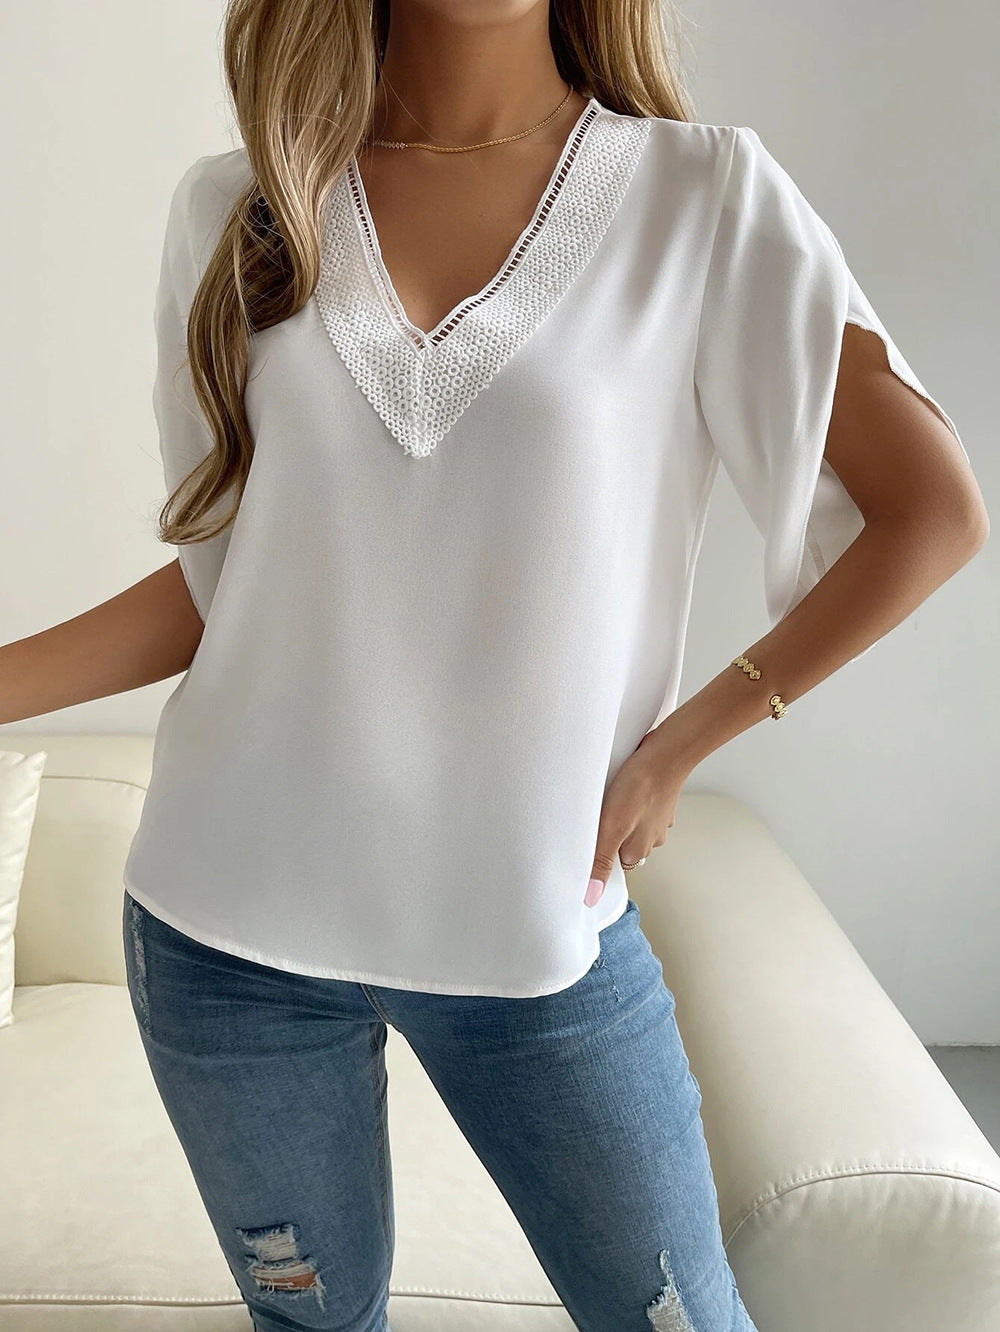 V neck Lace Solid Color Top Short Sleeve Chiffon Shirt